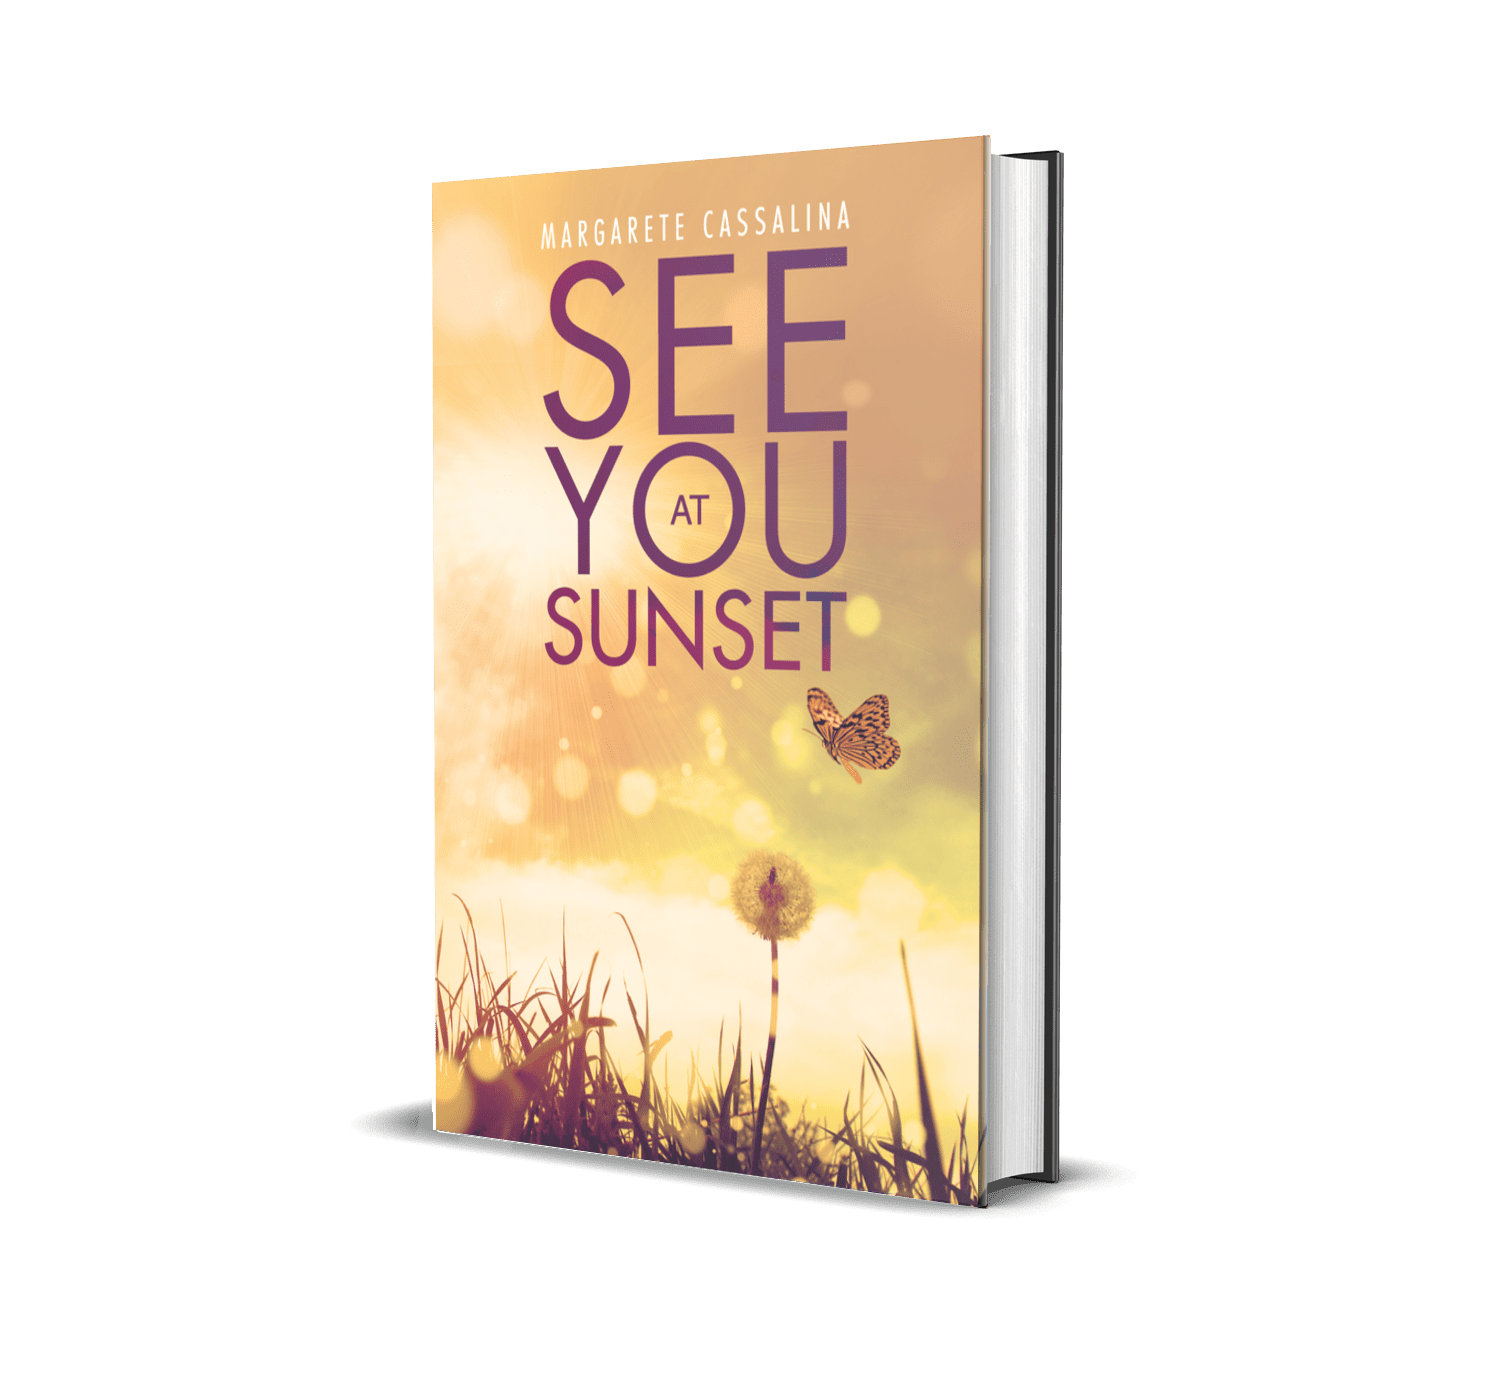 The See You at Sunset cover shows peach and yellow sparkely sunlight over a butterfly about to land on a dandelion.